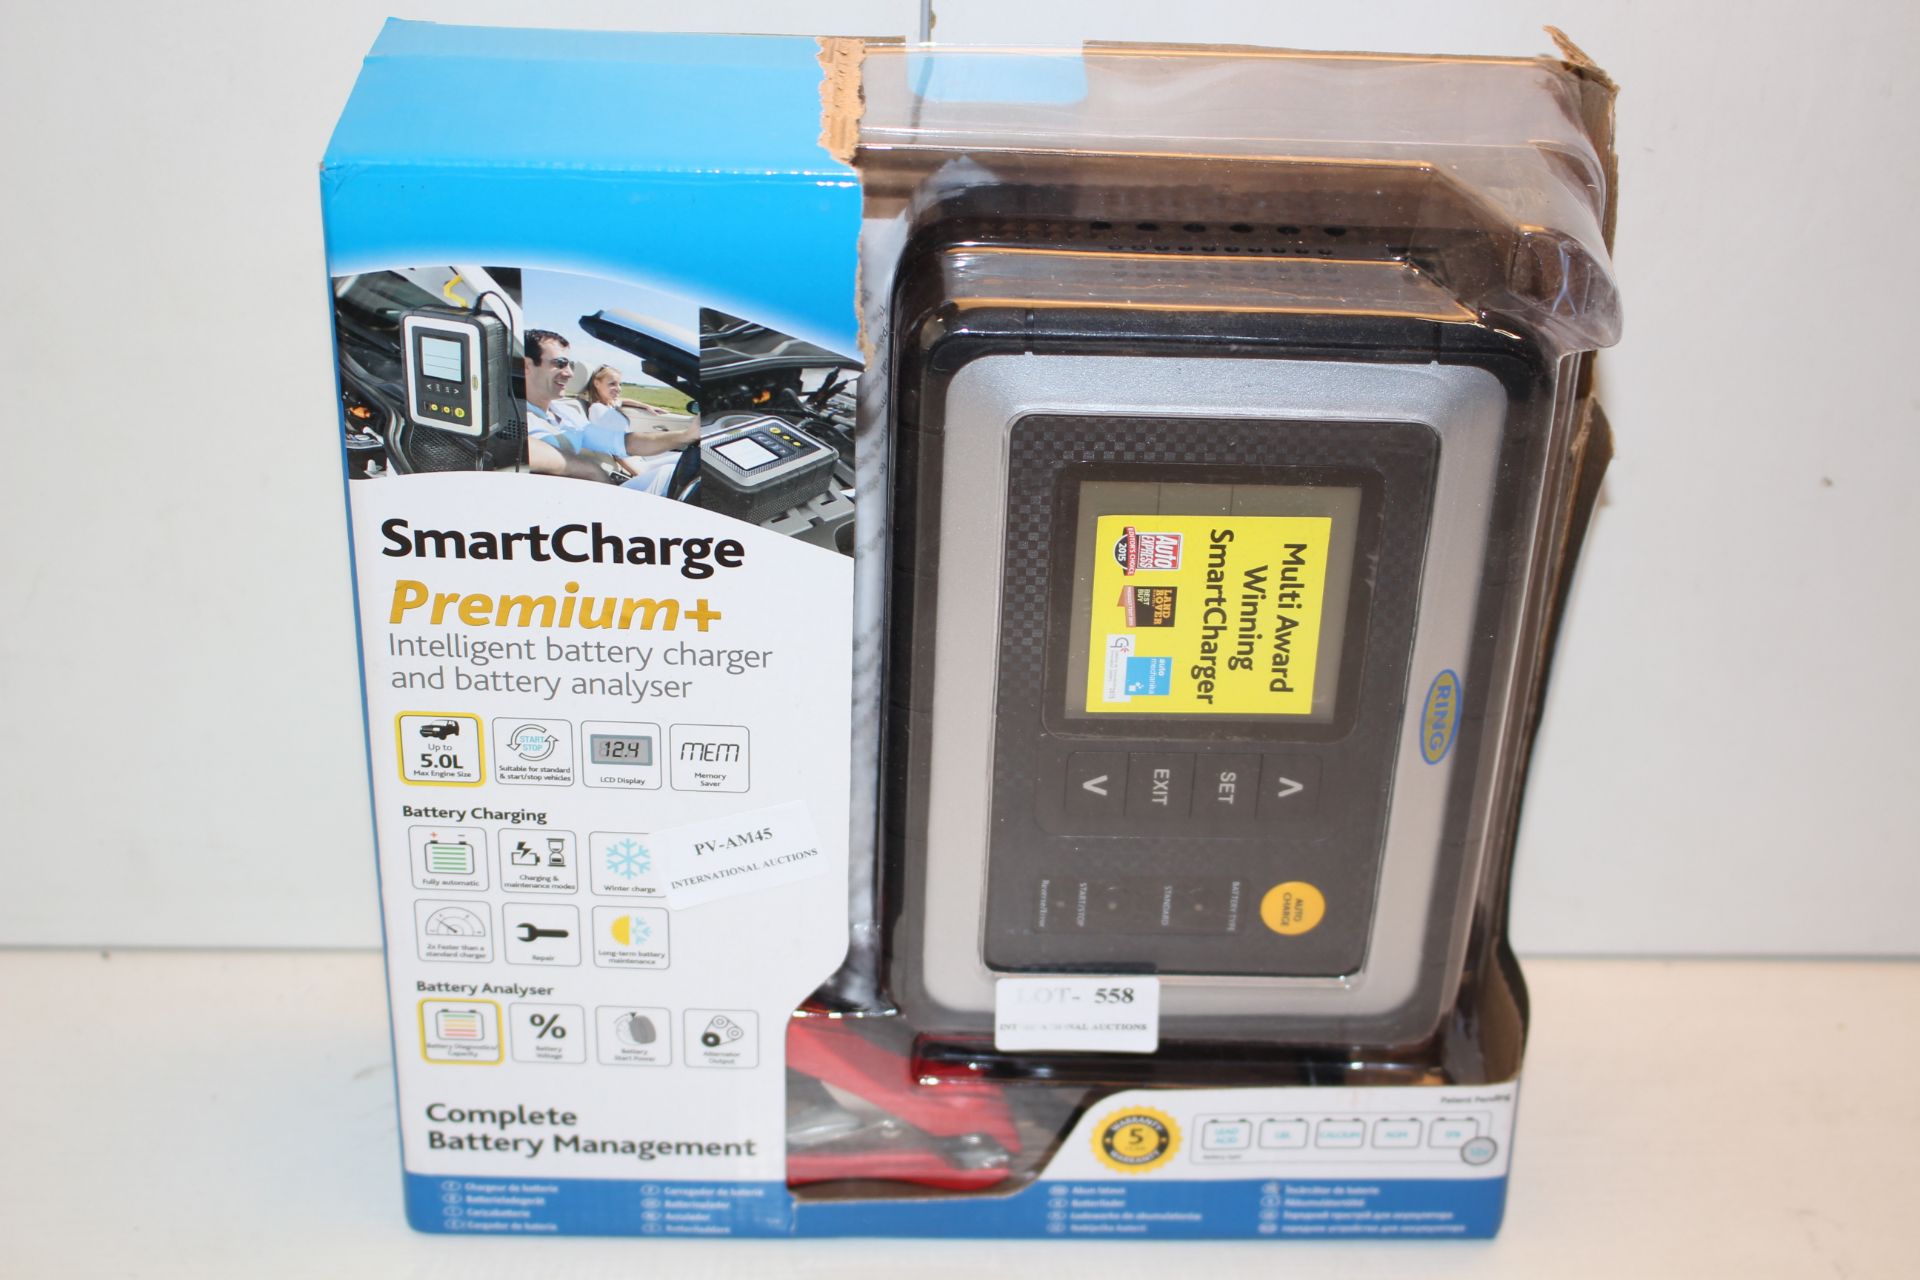 BOXED RING SMARTCHARGE PREMIUM+ INTELLIGENT BATTERY CHARGER AND BATTERY ANALYSER RRP £111.